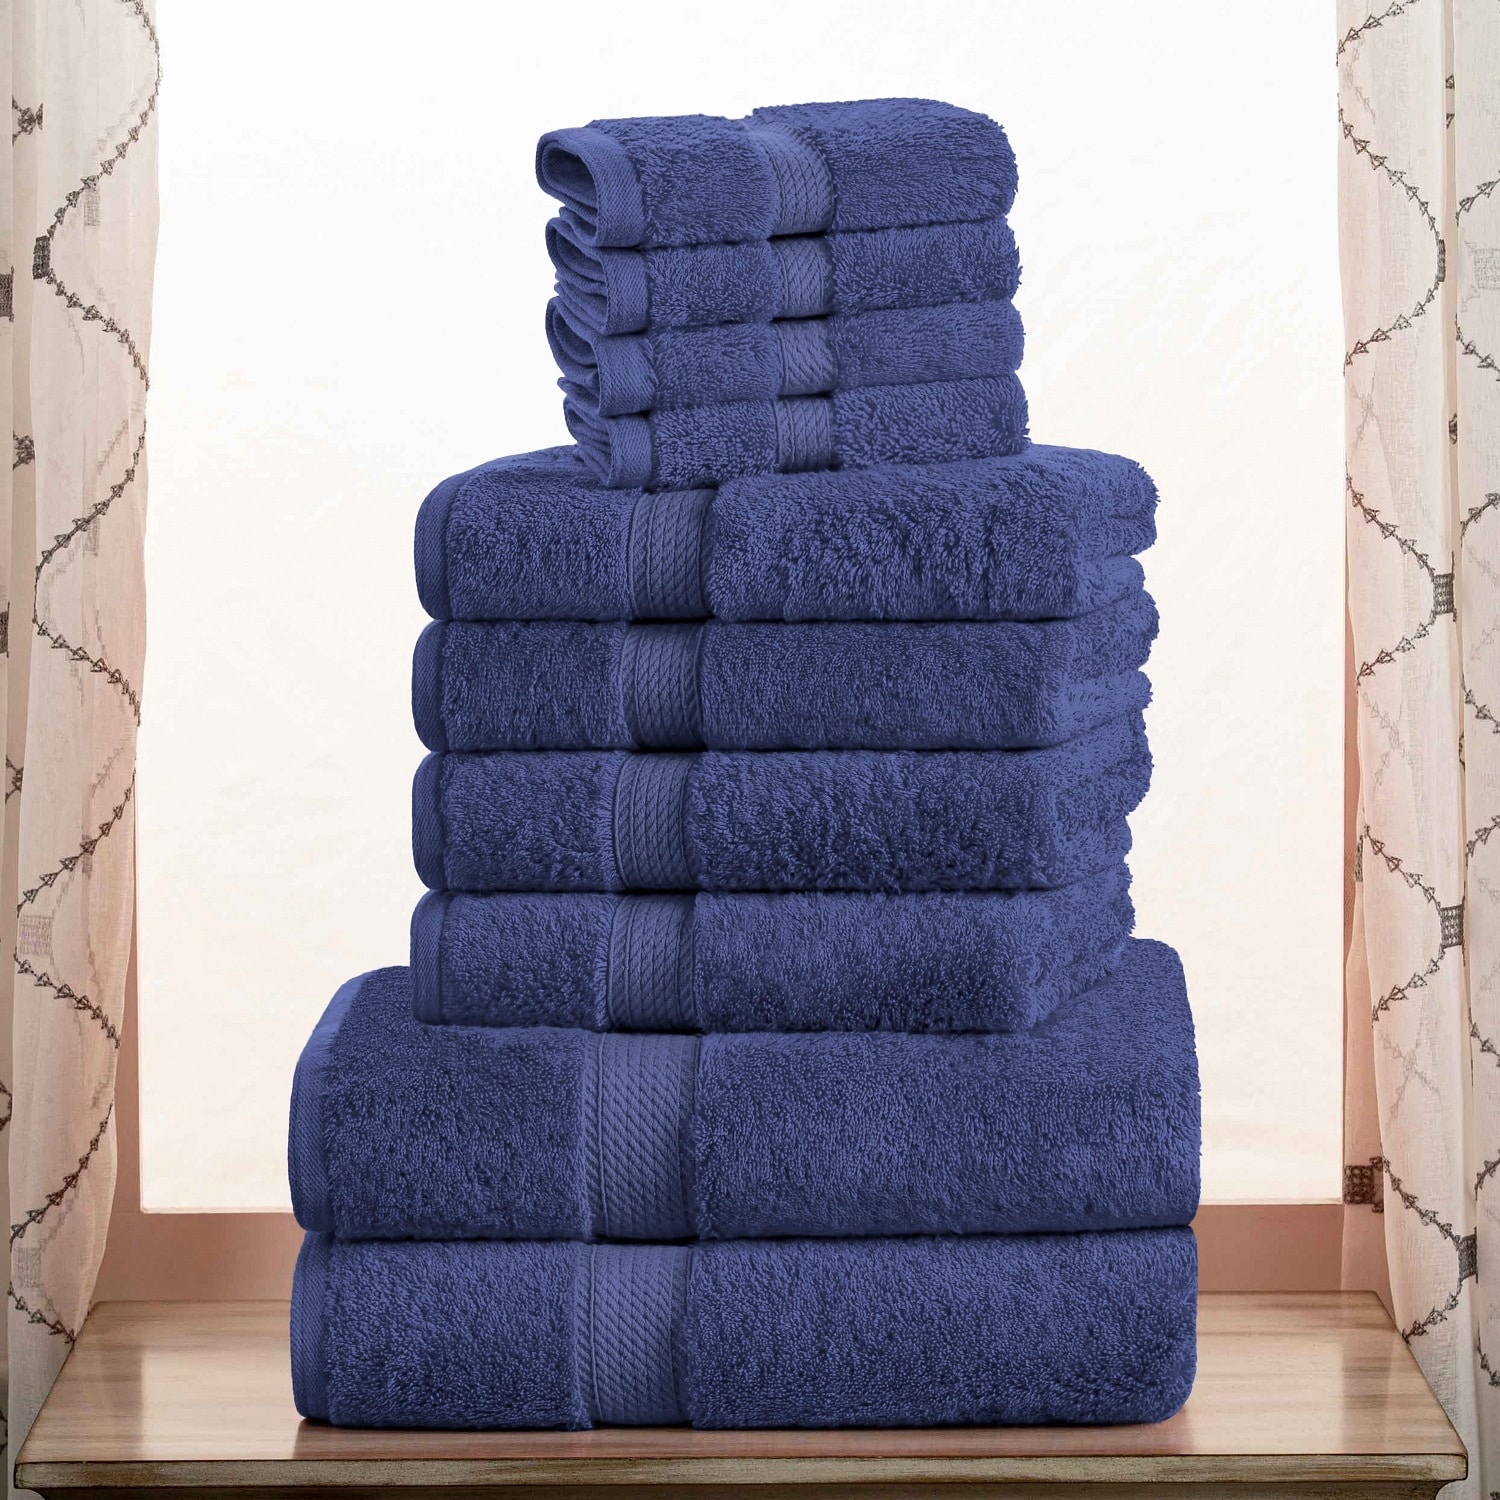 https://ak1.ostkcdn.com/images/products/is/images/direct/92b08e0f7f1dd47ed148b6a608d90d7be0c8c81c/Egyptian-Cotton-Heavyweight-Solid-Plush-Towel-Set-by-Superior.jpg